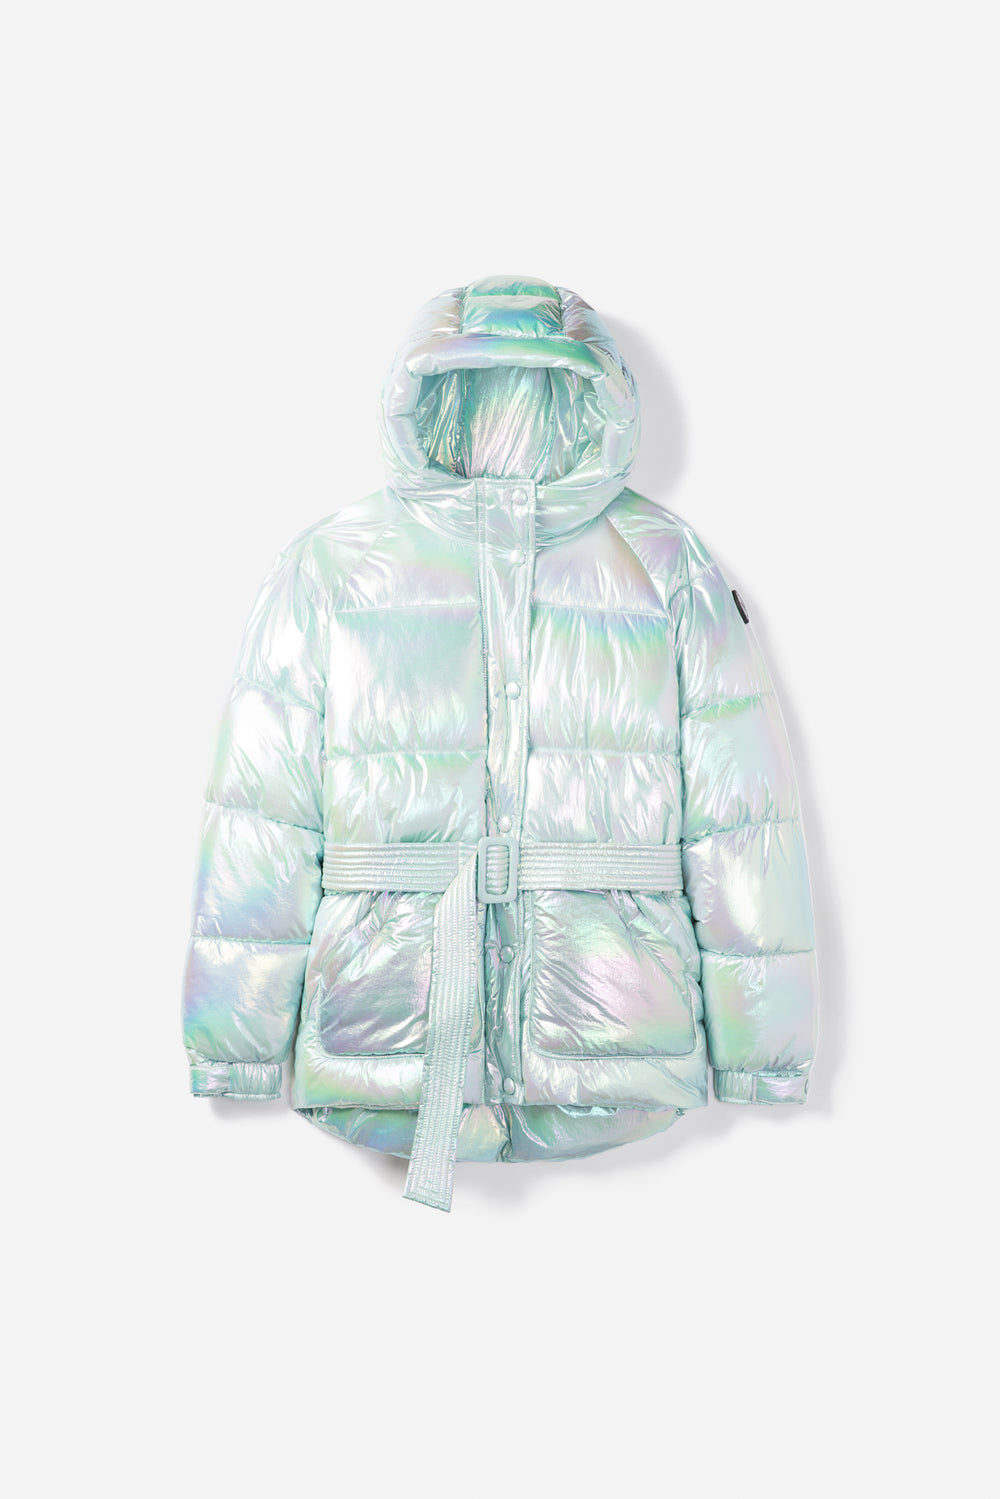 New Ideas Iridescent White Puffer Jacket – Shopaholics Only Boutique